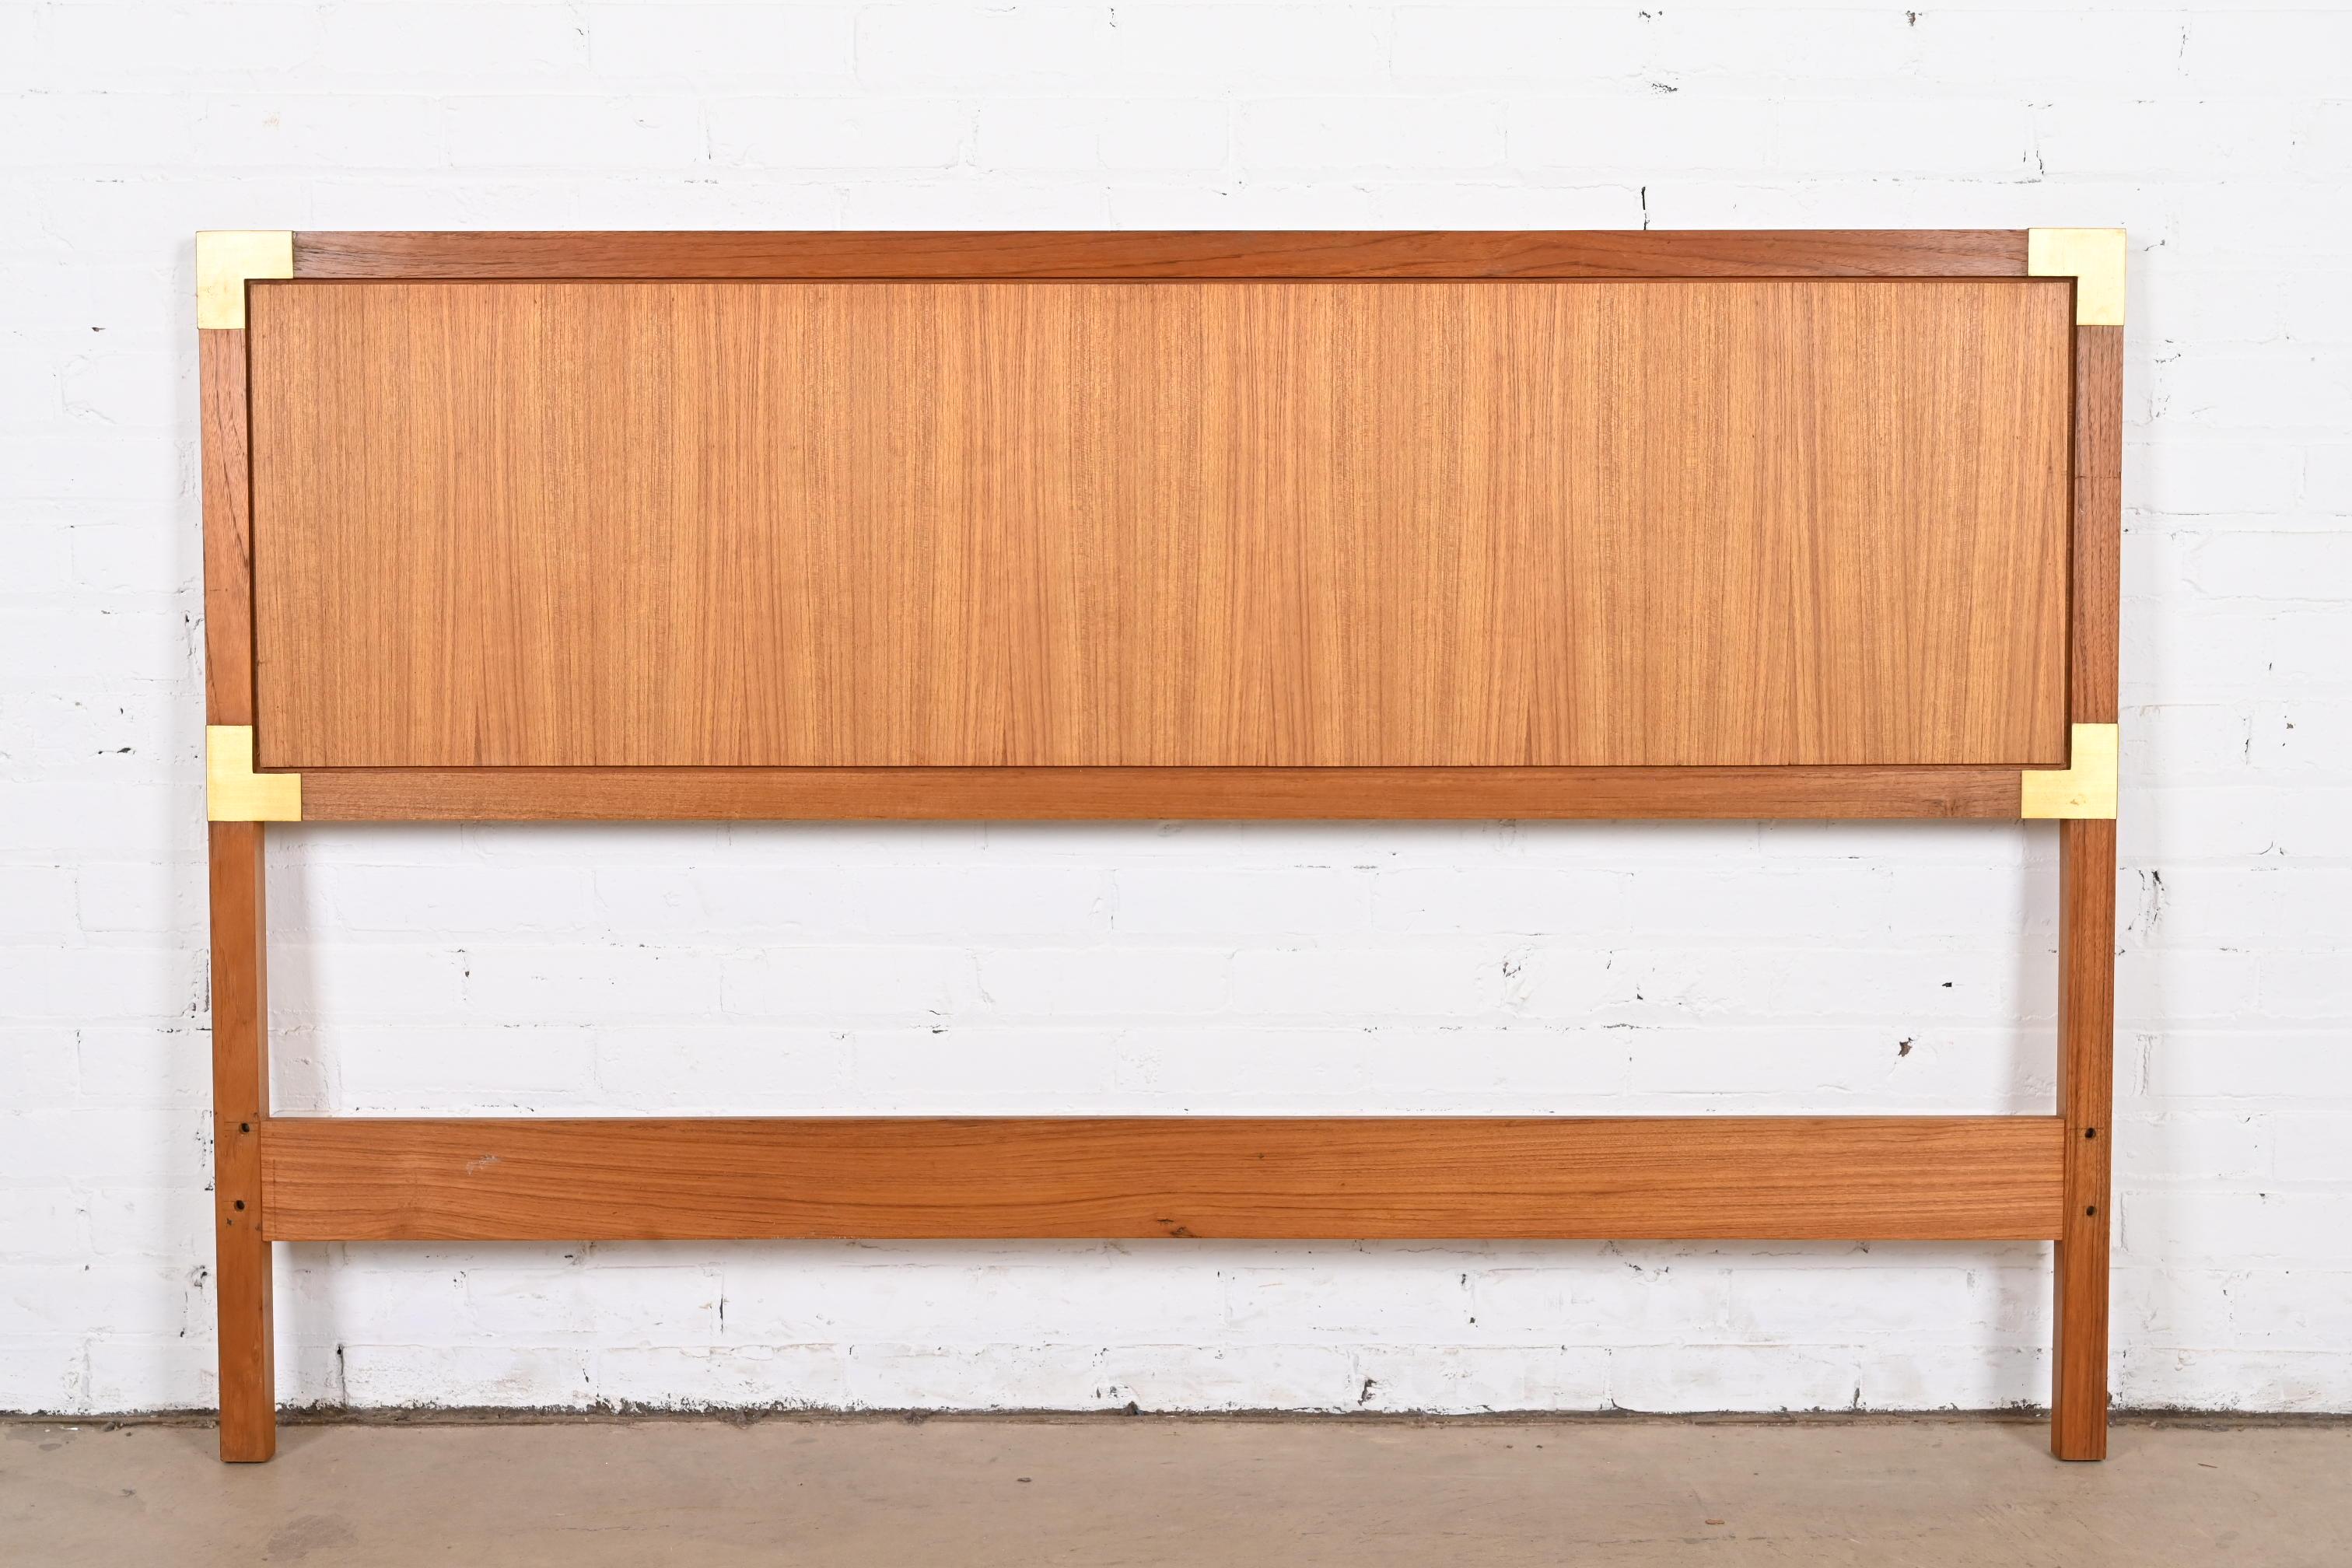 A beautiful midcentury Danish Modern Campaign style queen size headboard

Denmark, circa 1970s

Teak, with brass accents.

Measures: 60